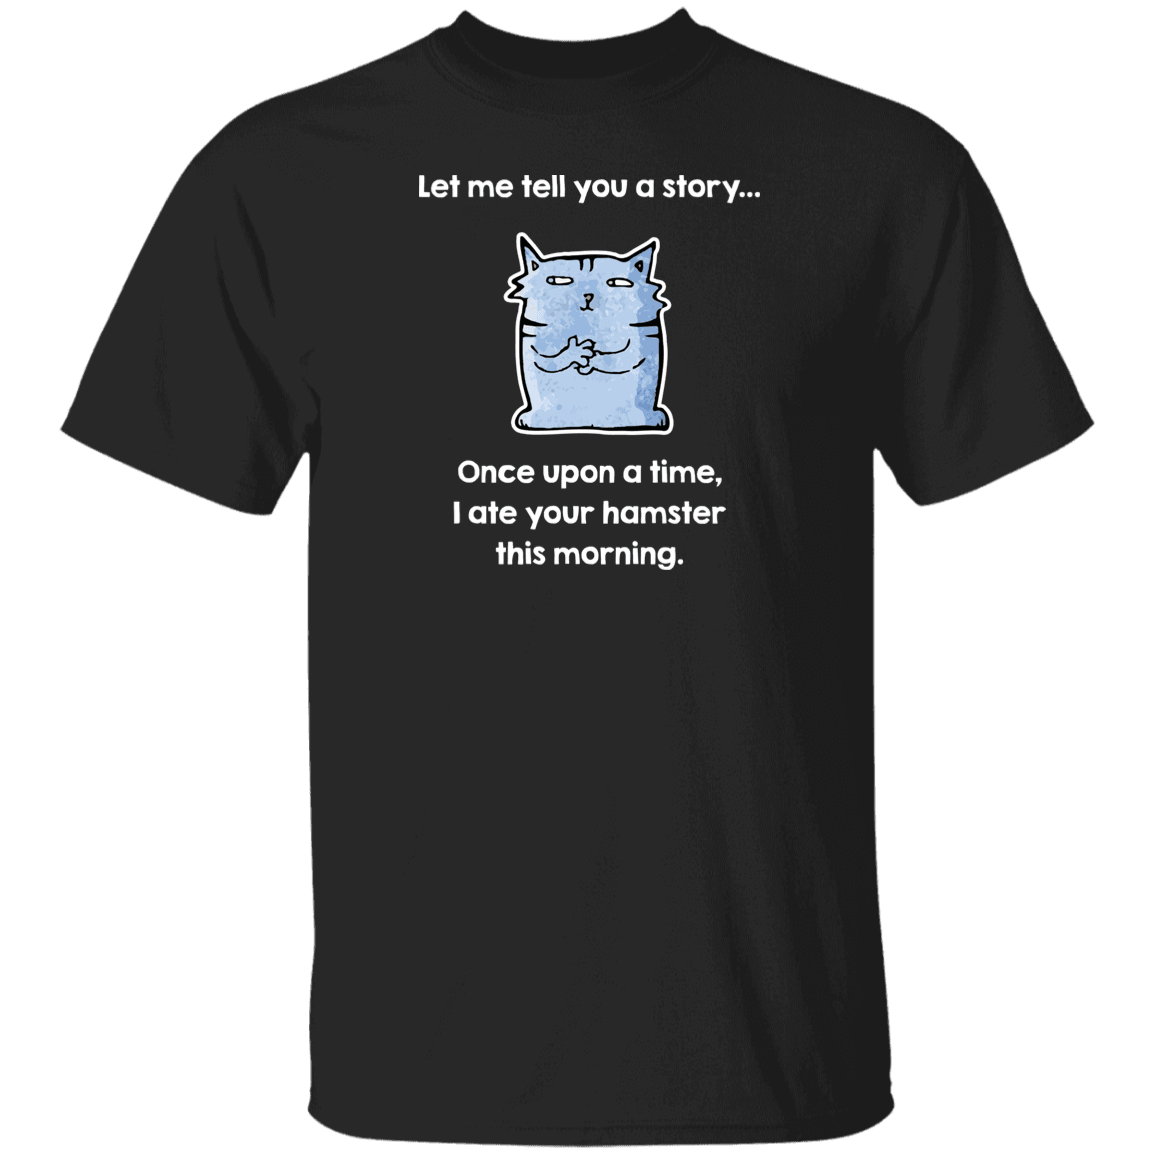 Designs by MyUtopia Shout Out:Let Me Tell You a Story ... 100% cotton Unisex T-Shirt Special Offer,Black / S,Adult Unisex T-Shirt